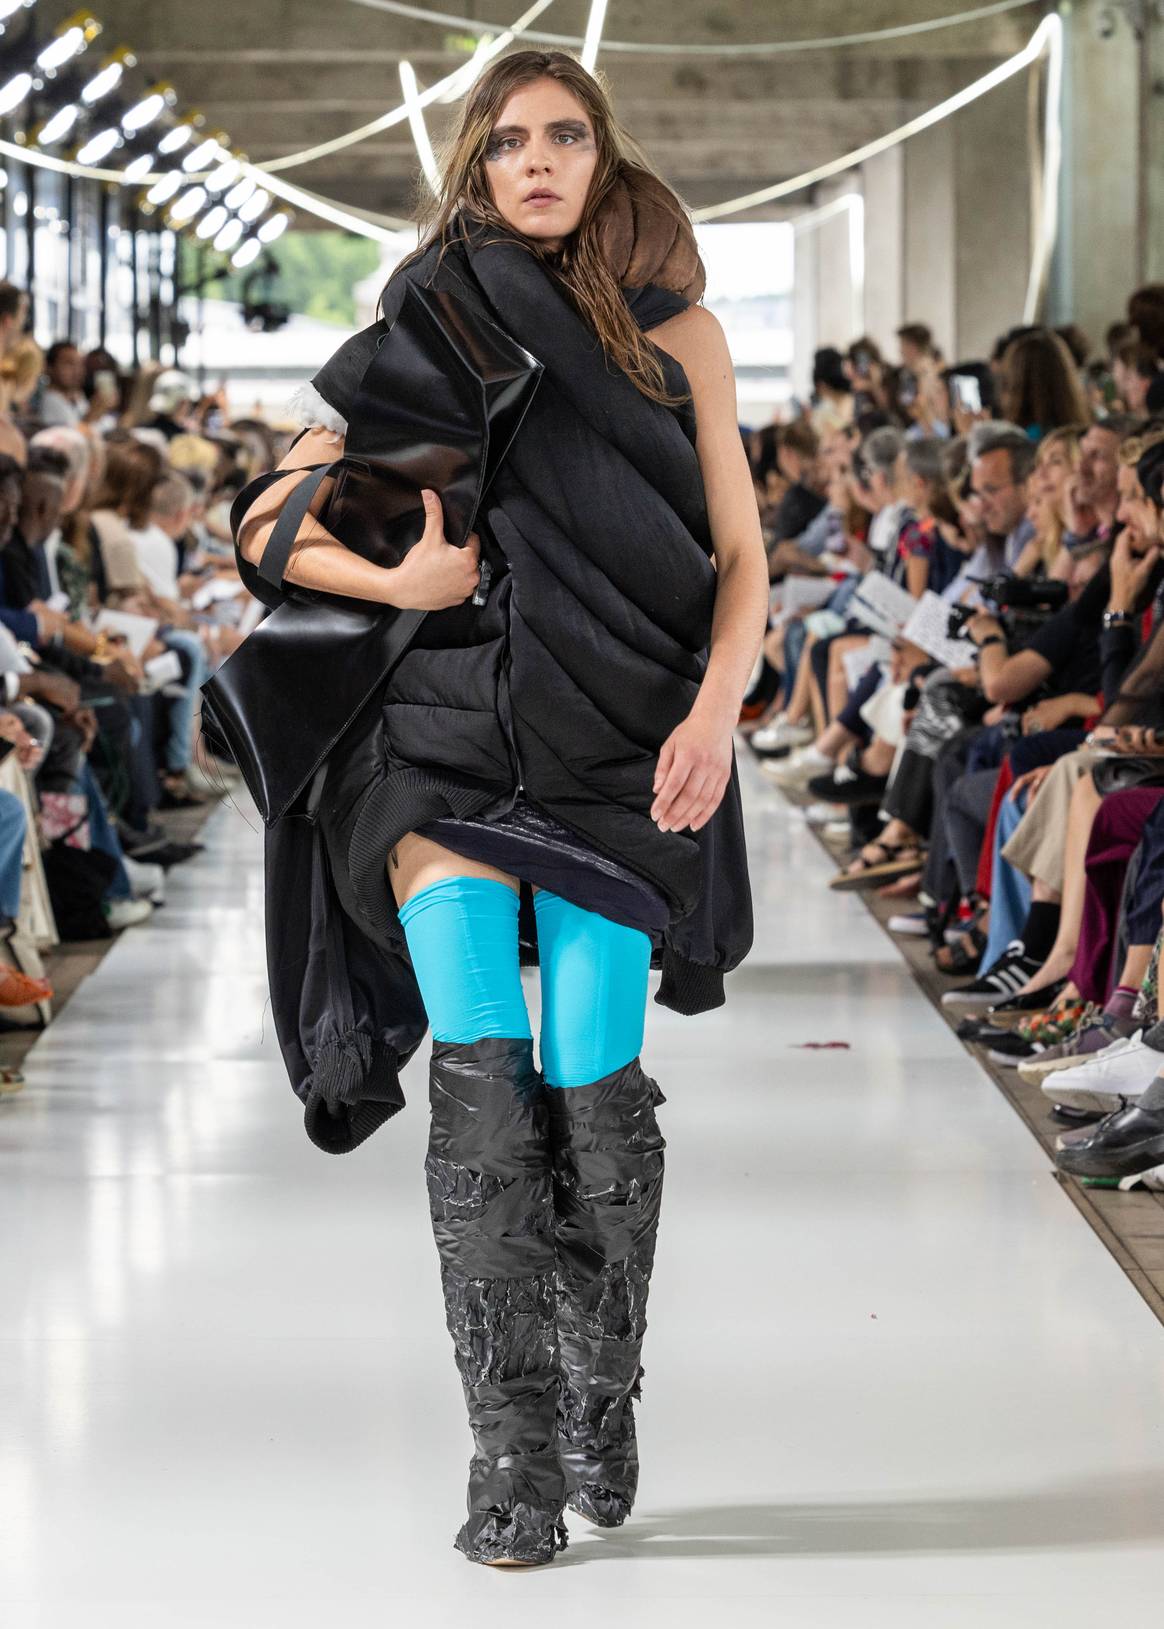 Woman on catwalk wearing padded black boots with bright blue spandex on top and sleeveless jacket.  IFM GRADUATE CLASS 2023.